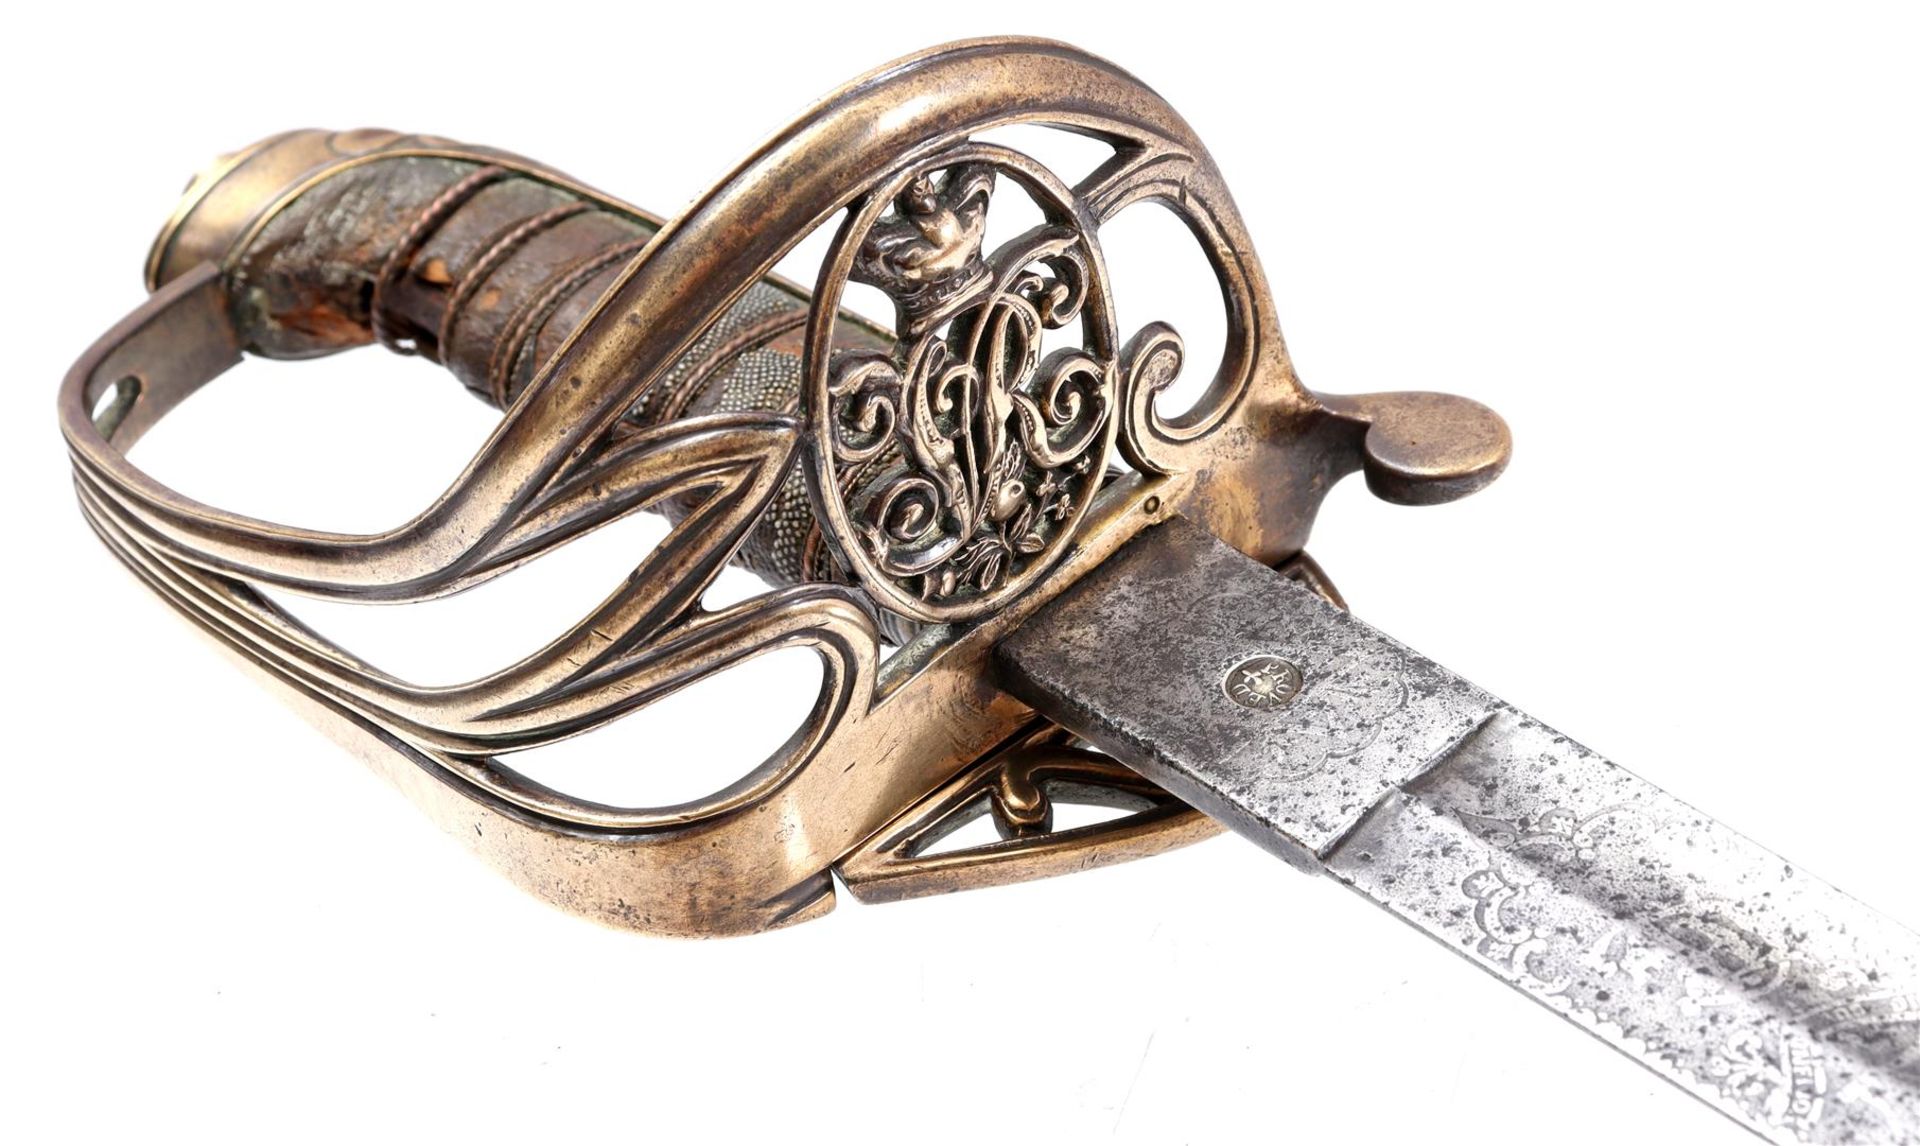 English cavalry officer's saber - Image 2 of 4